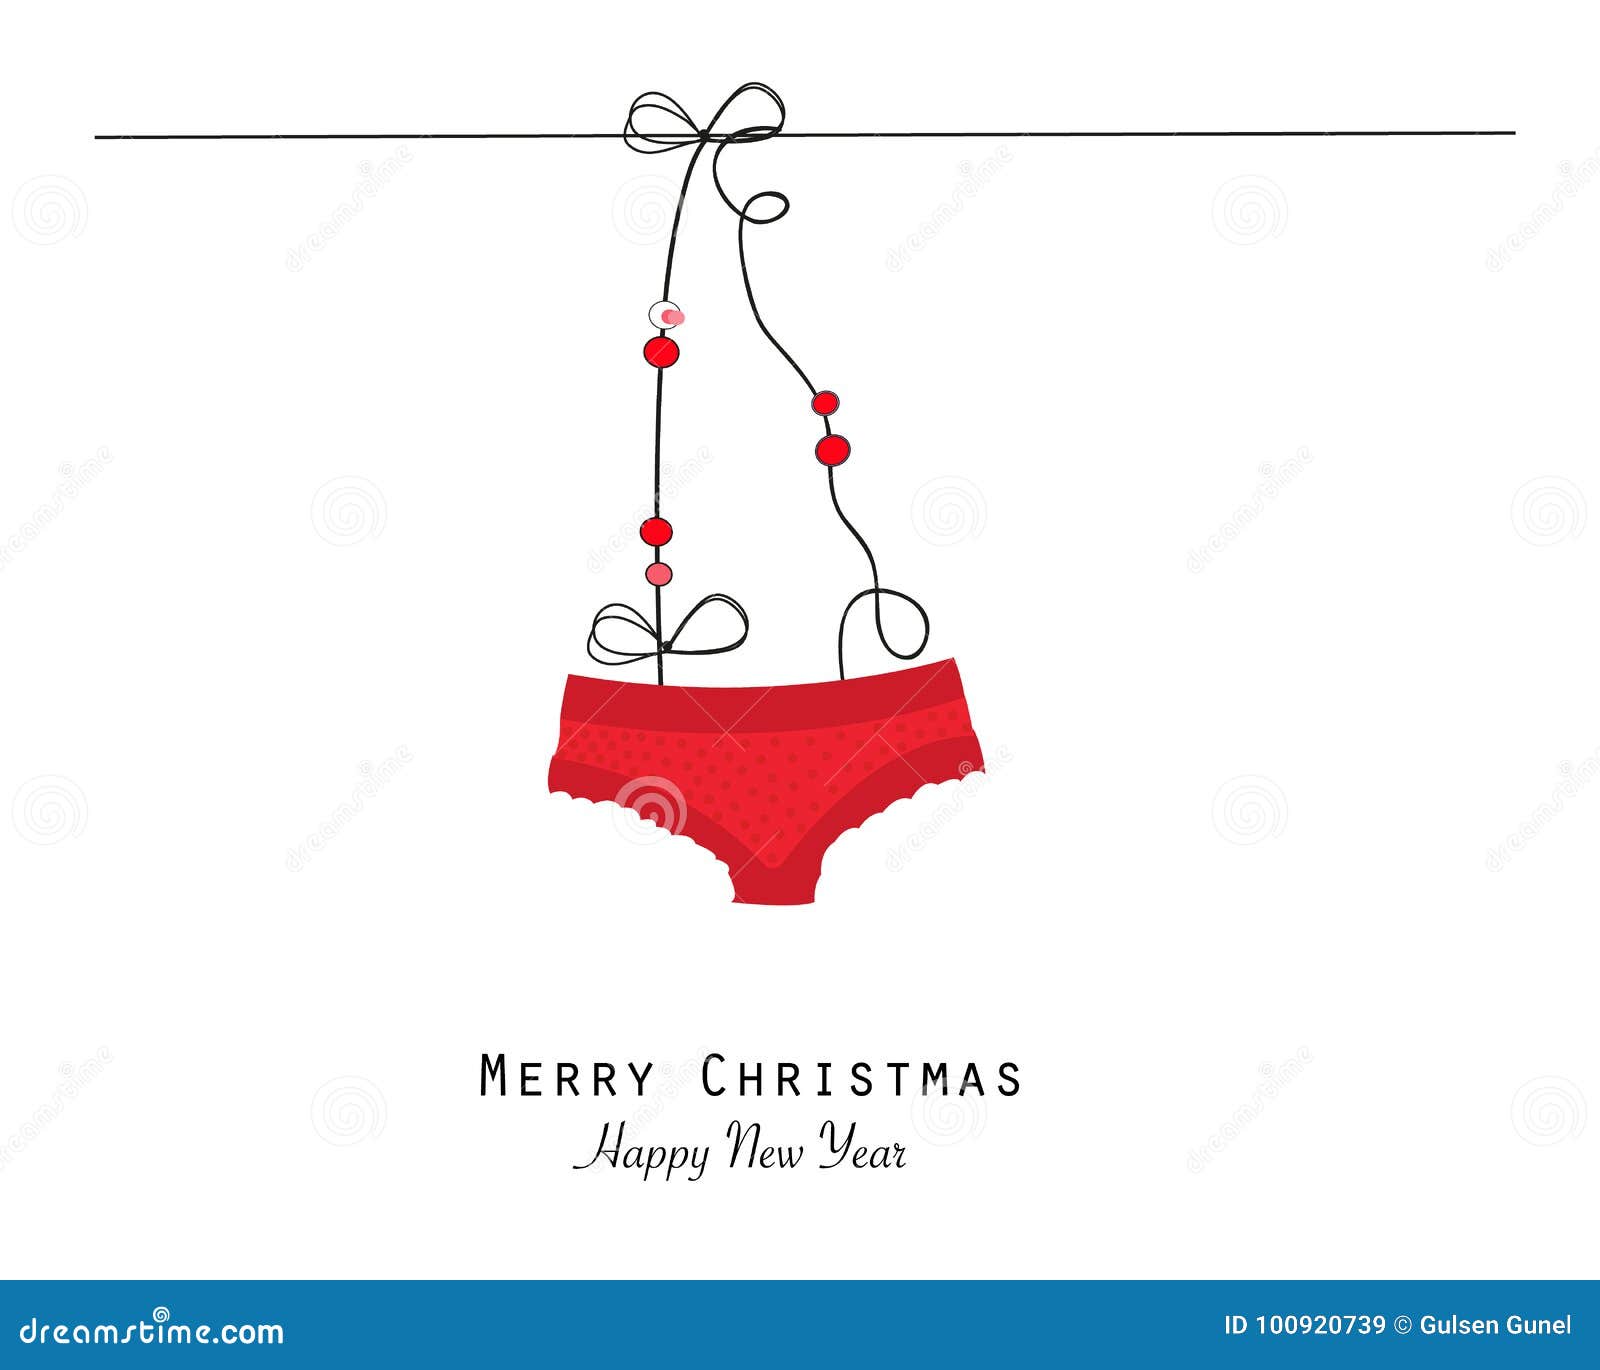 Christmas Red Panties.Underwear Red Lingerie. Happy New Year Greeting Card  Stock Vector - Illustration of decoration, lingerie: 100920739